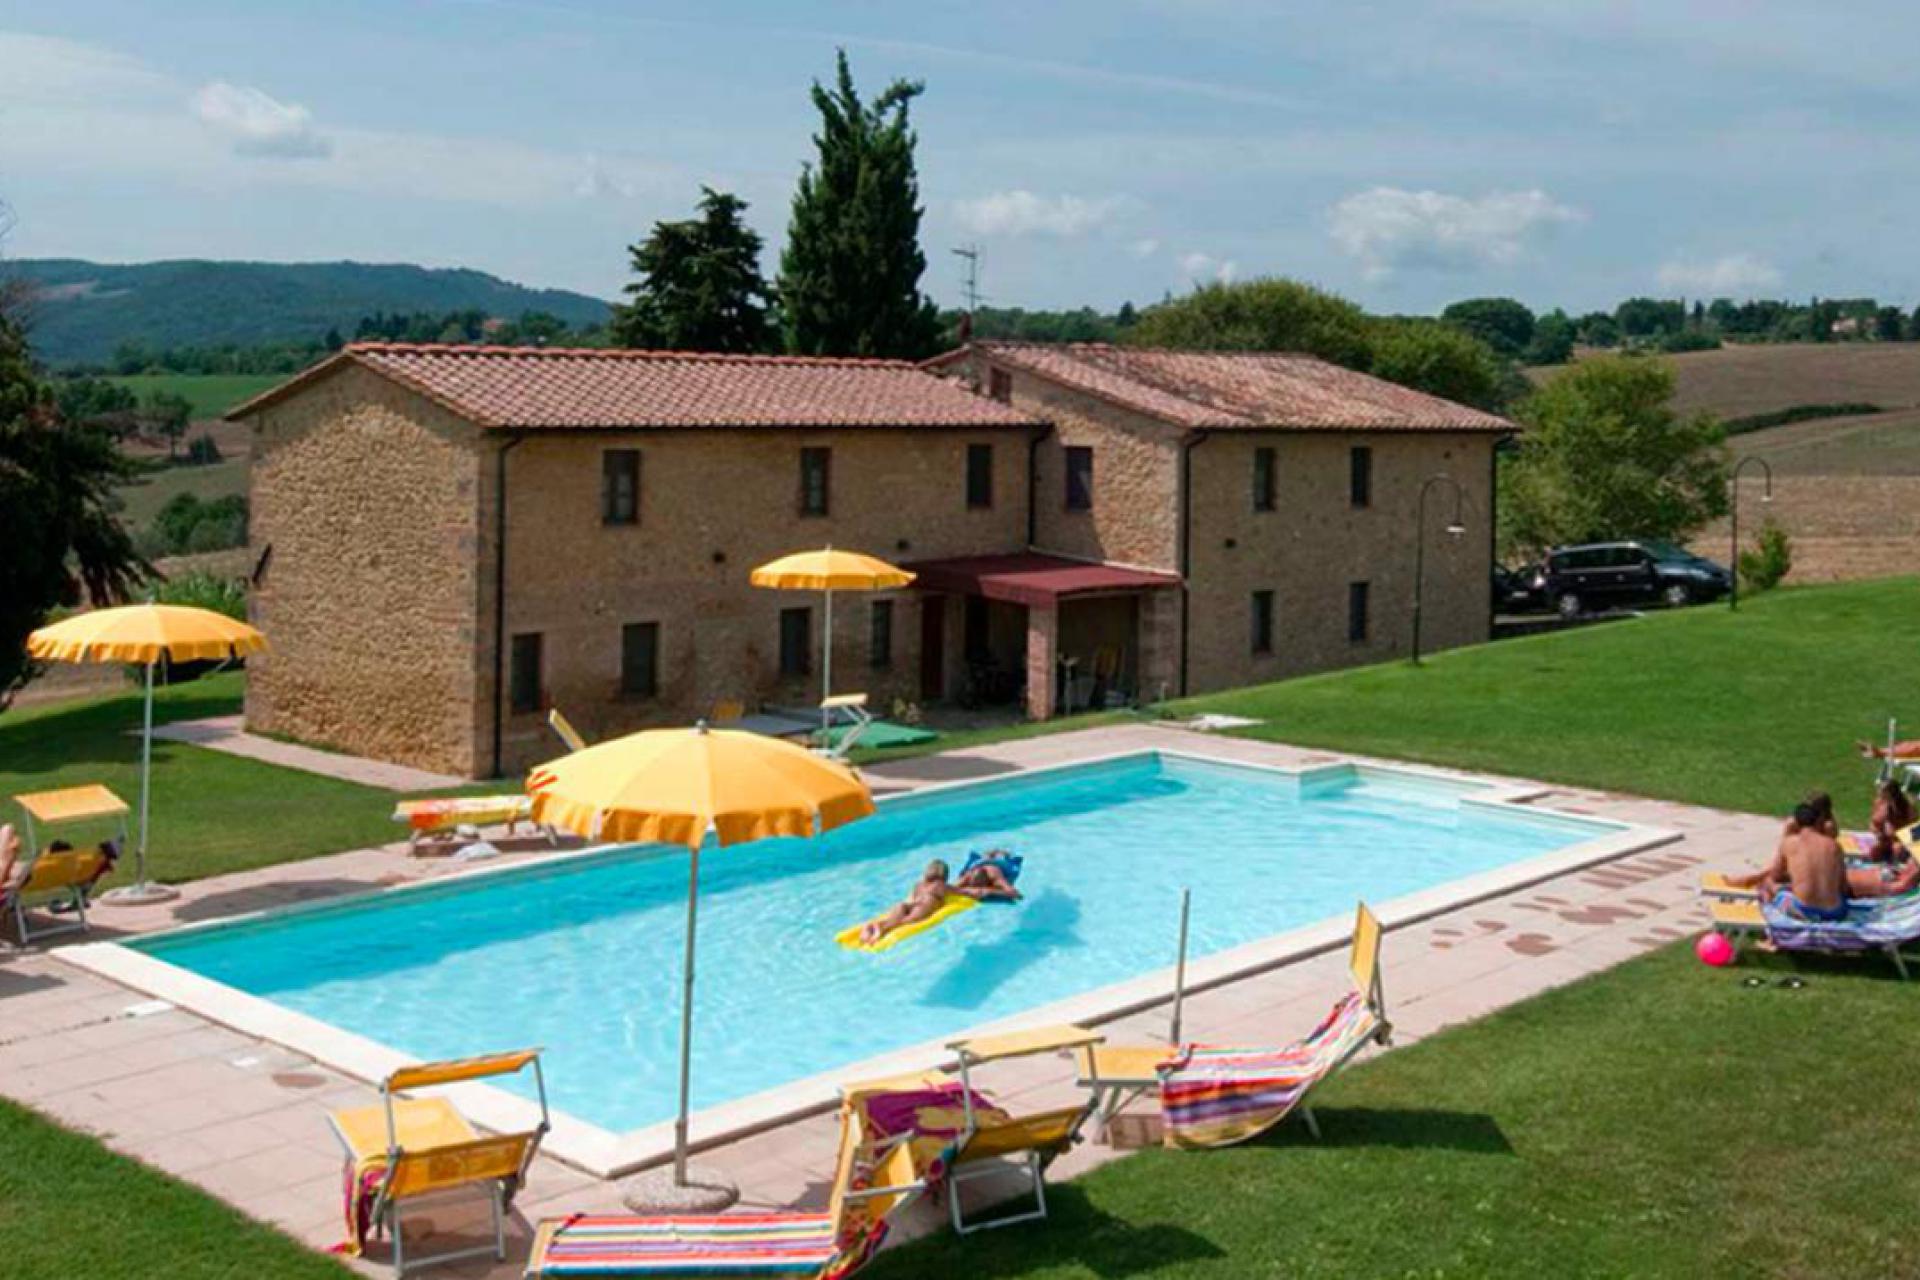 Tuscan agriturismo with heated pool and e-bikes